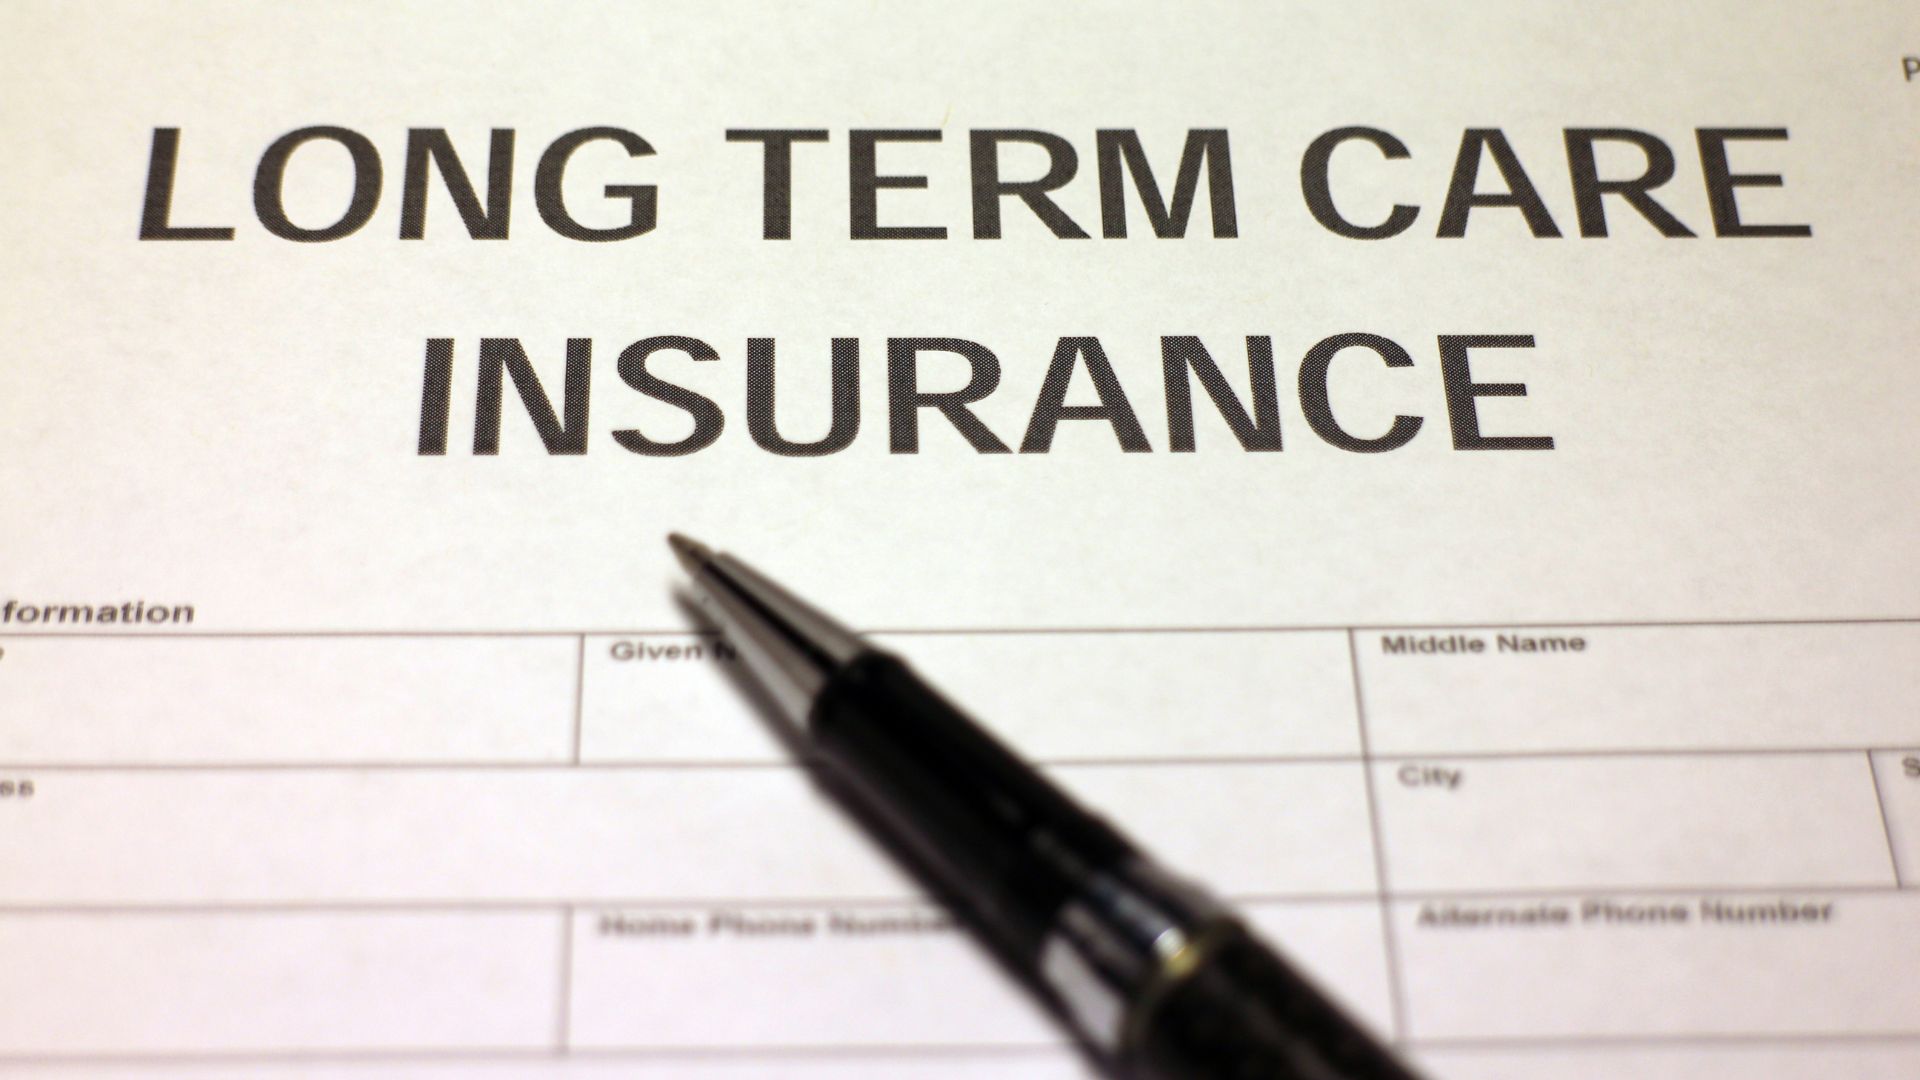 Long-term care insurance (LTCI) - Insurance in the US